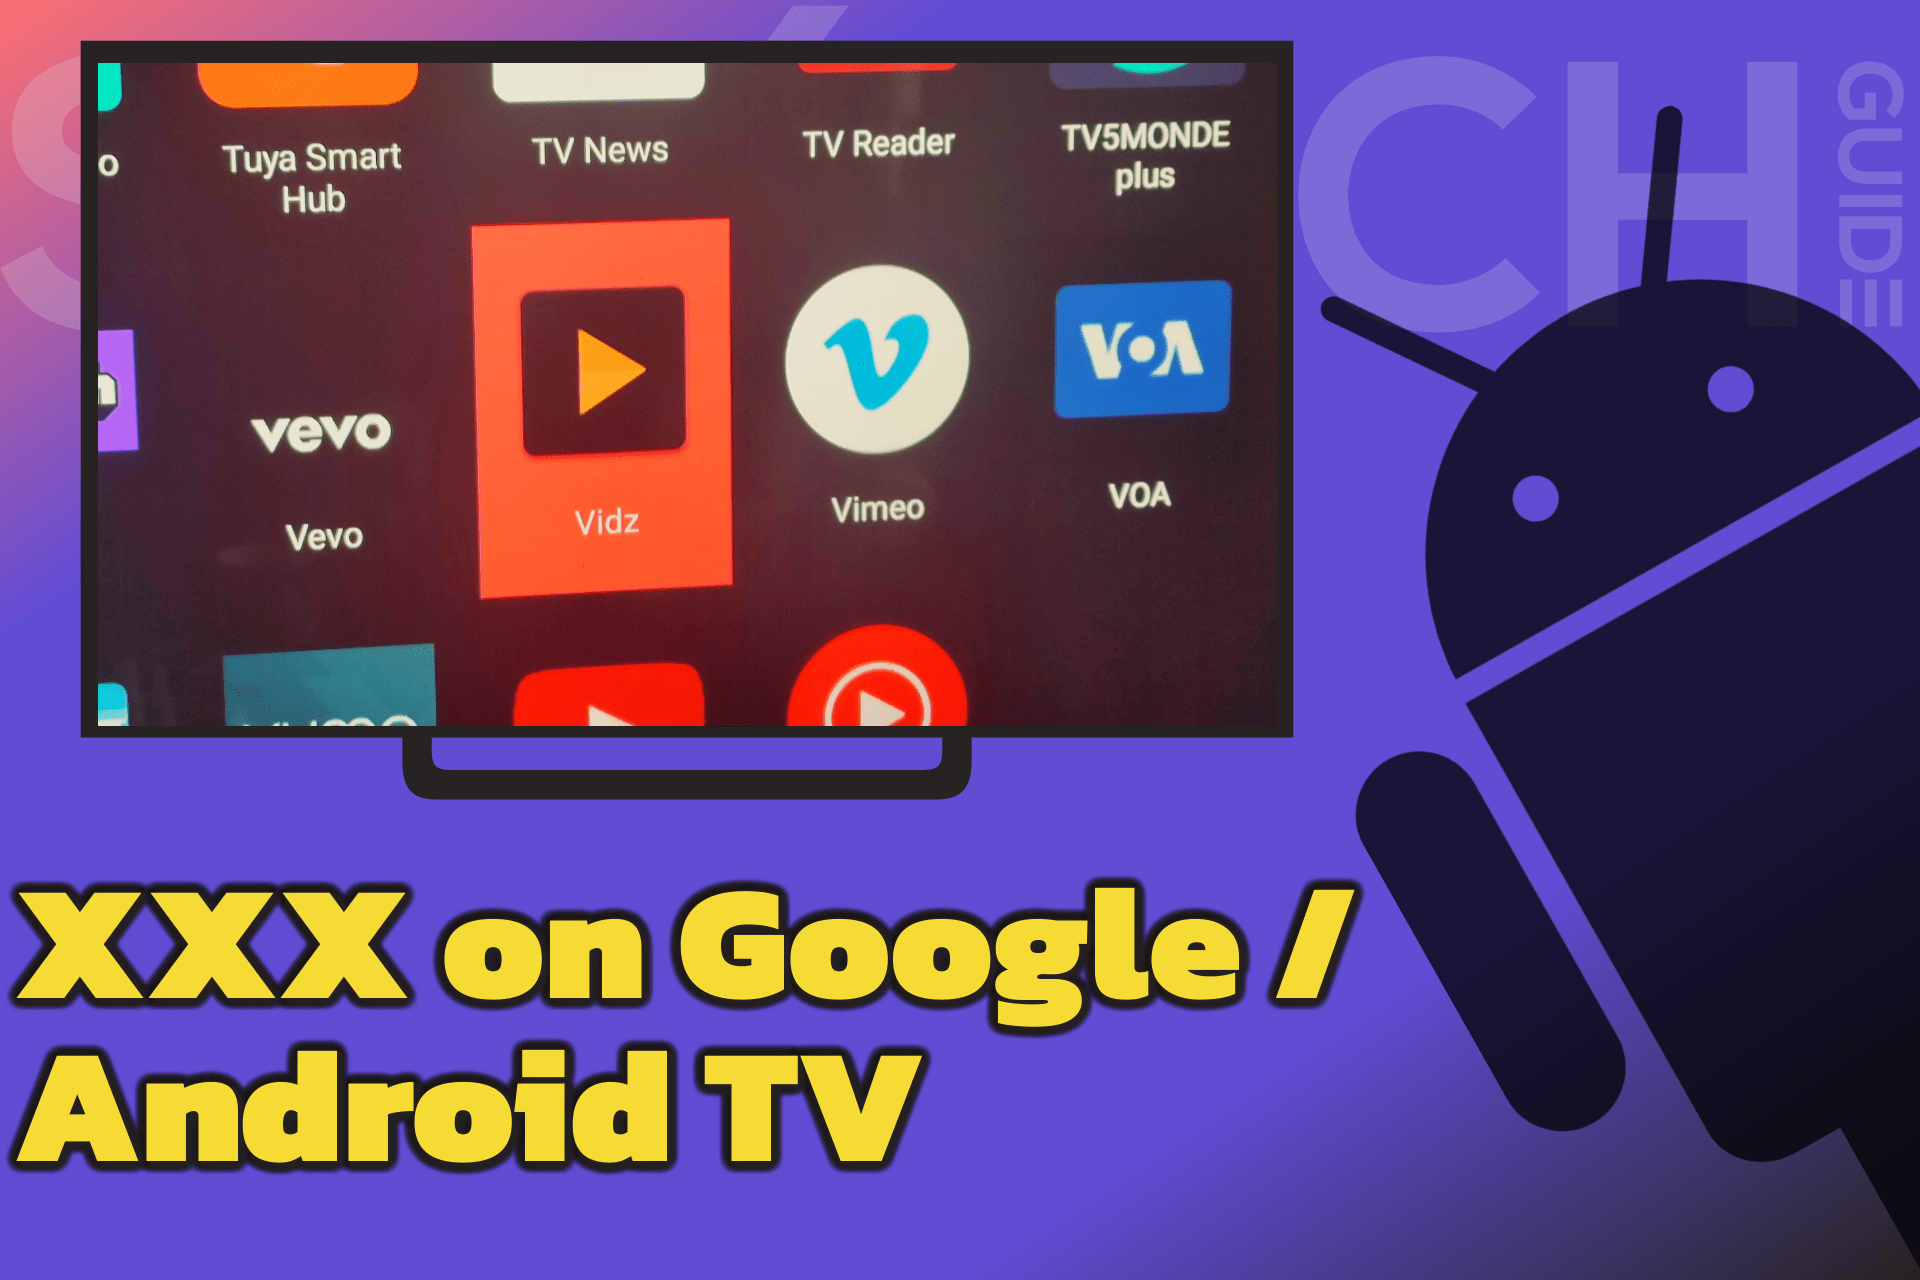 brandon cantwell recommends how to watch porn on android tv pic